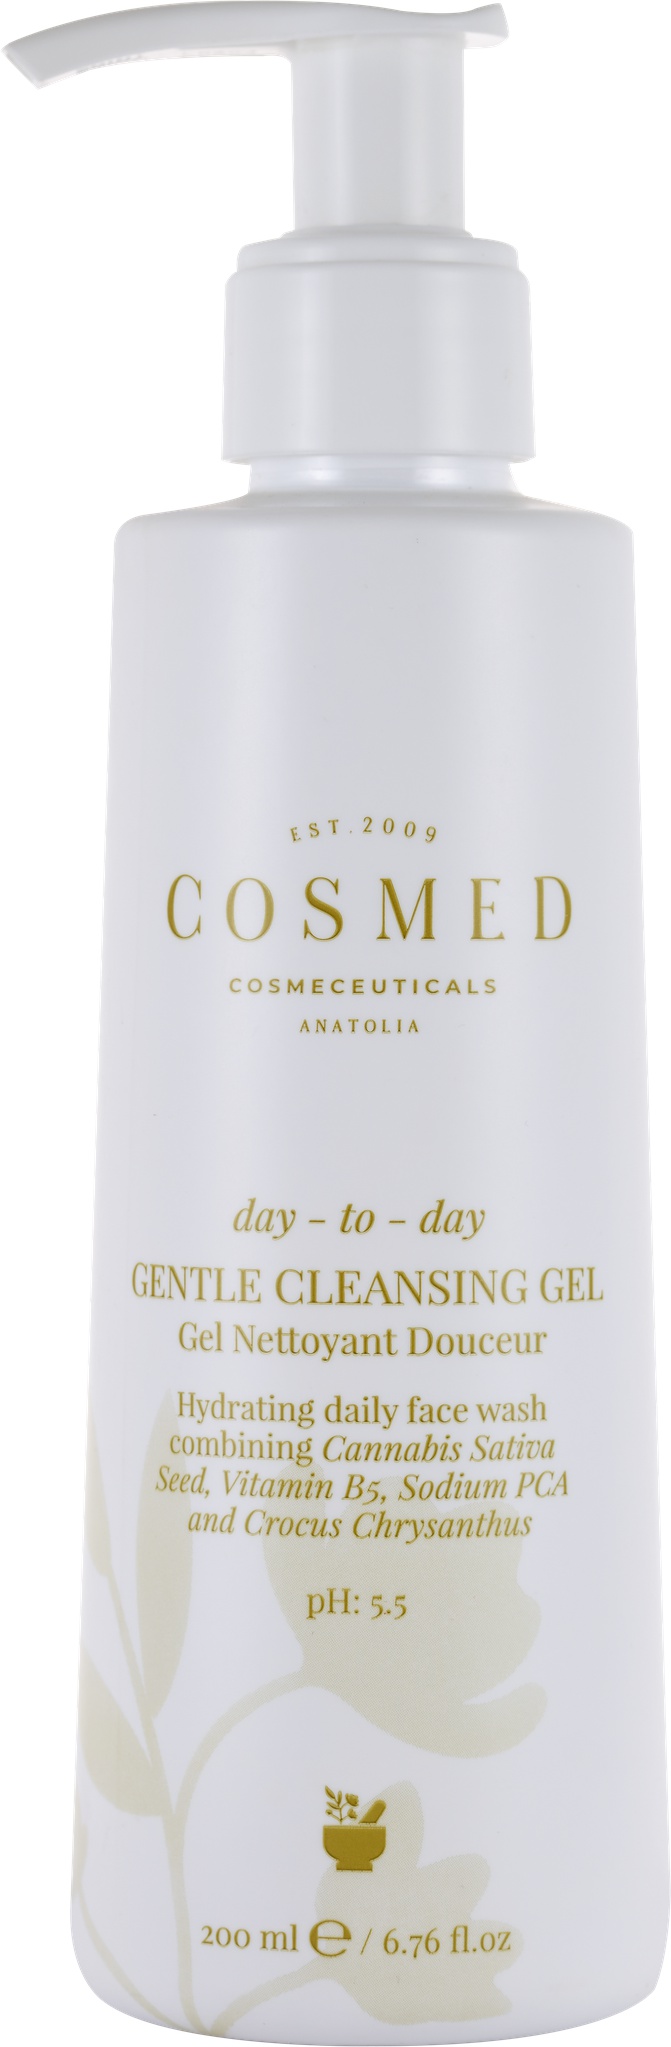 Cosmed Cosmeceuticals Day to Day - Gentle Cleansing Gel